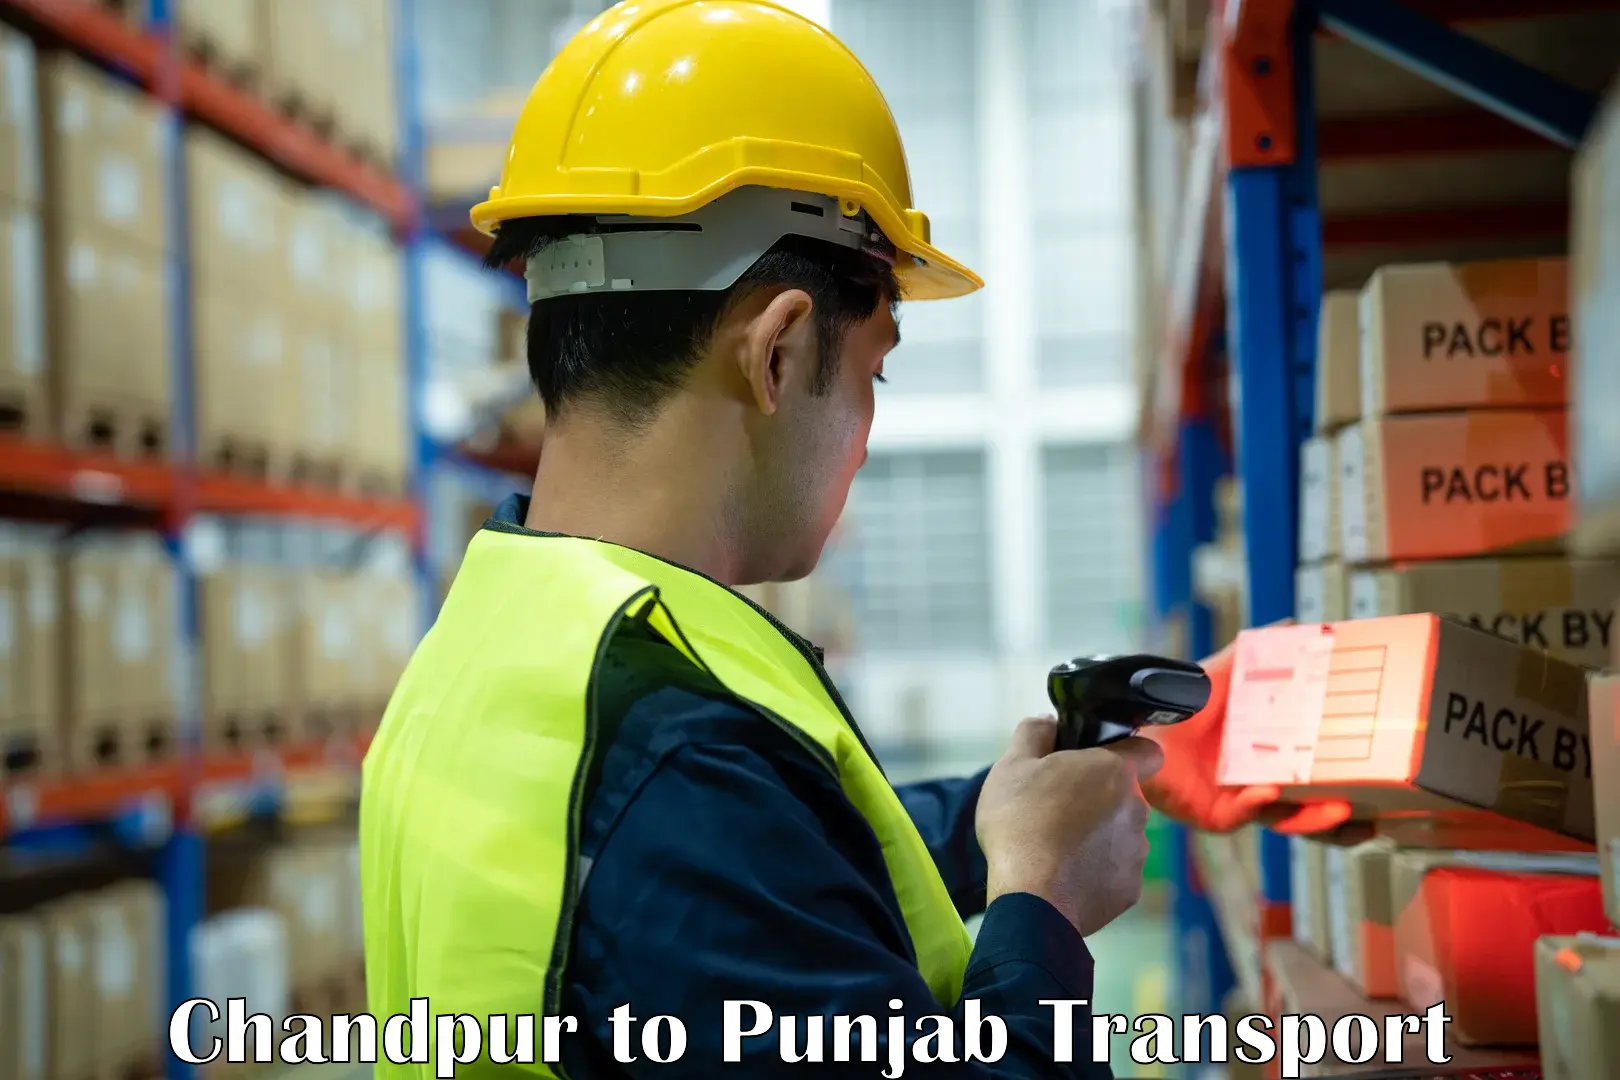 Commercial transport service Chandpur to Pathankot